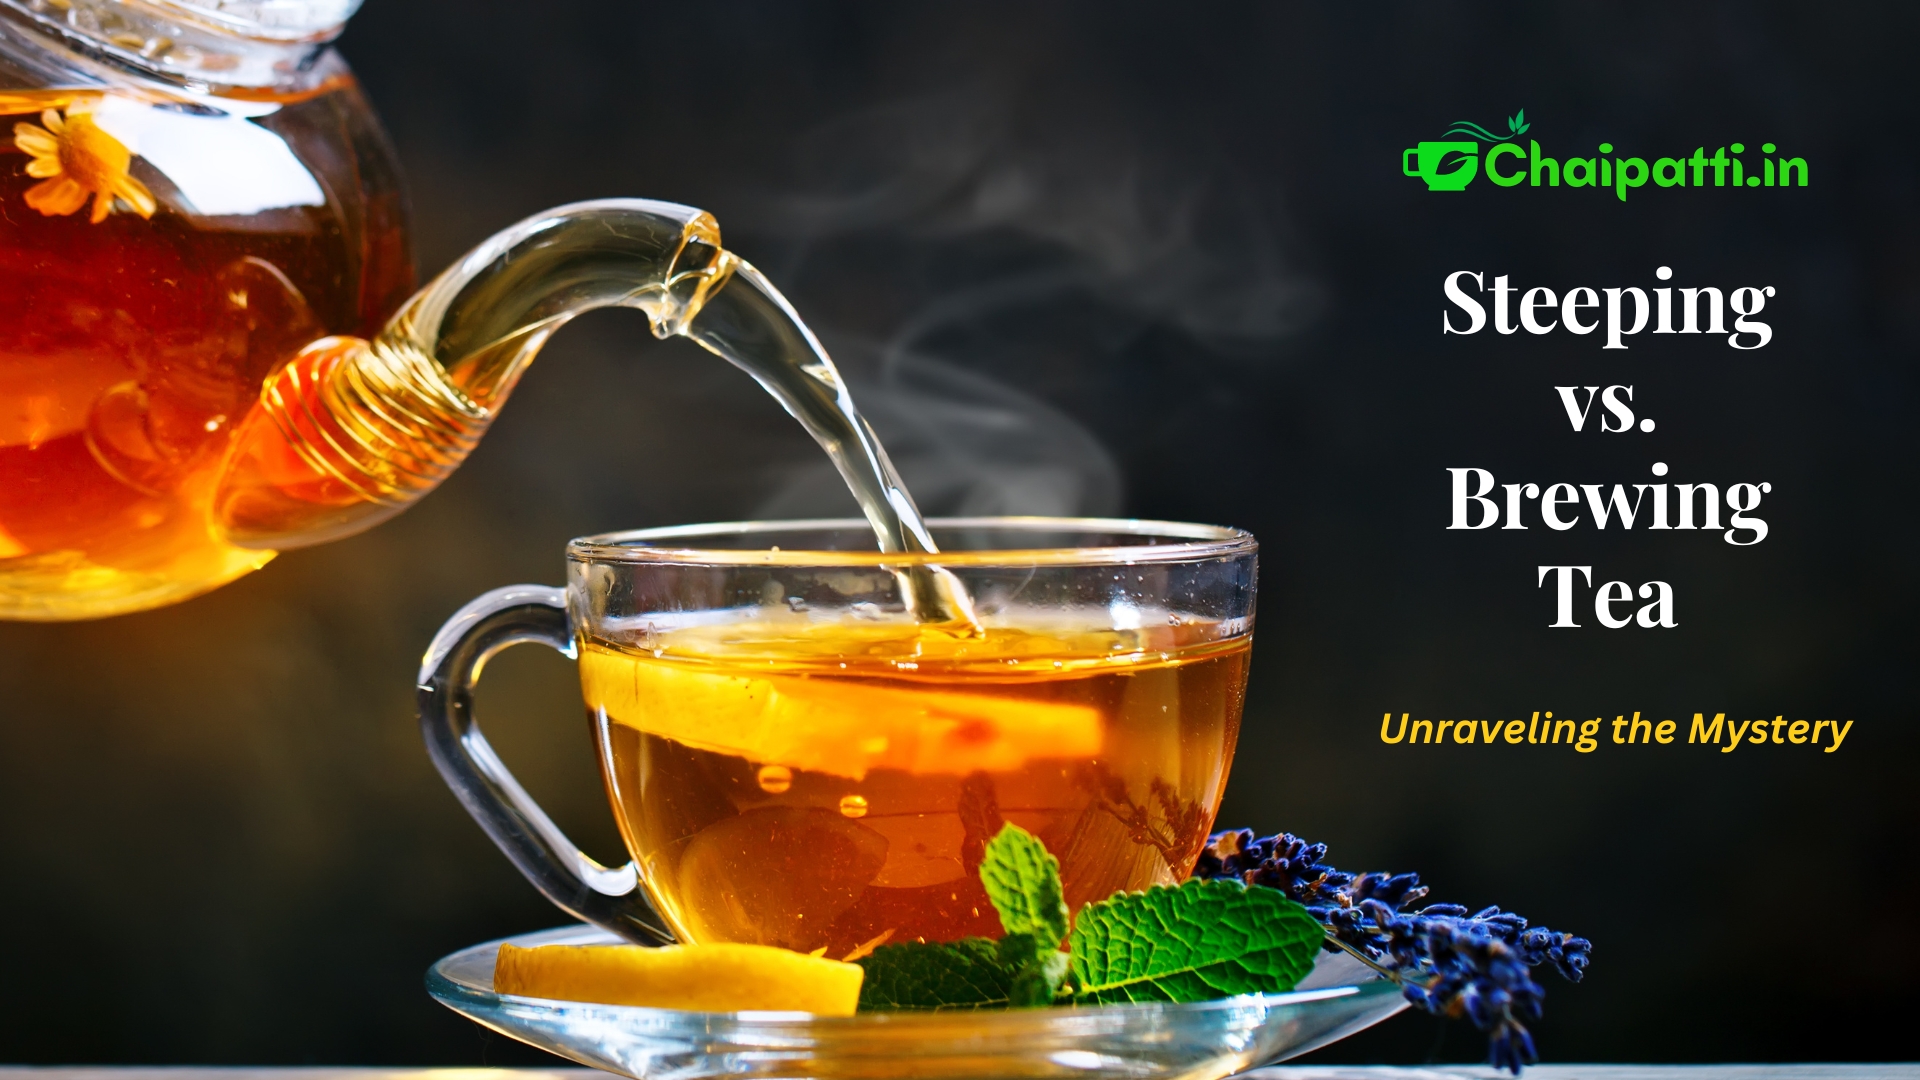 Steeping vs. Brewing Tea: Unraveling the Mystery